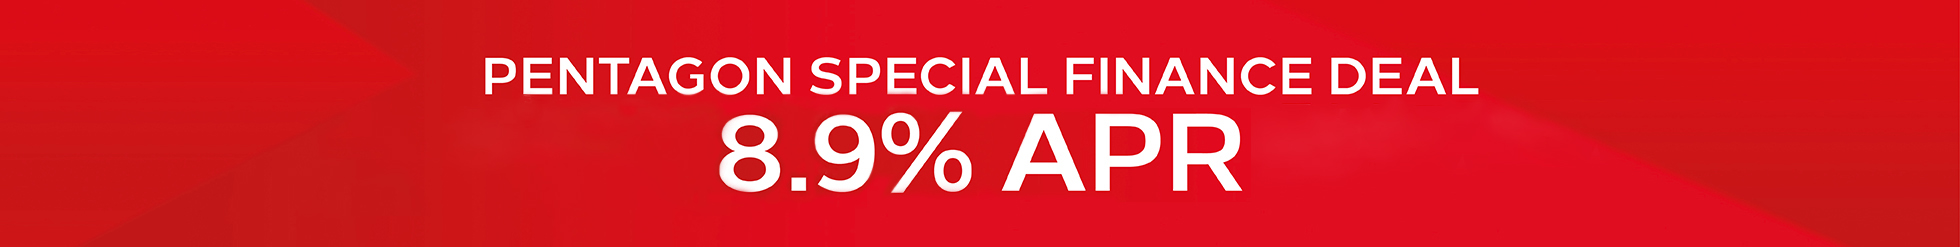 Pentagon Special Offer - Get 8.9% APR Finance On This Fiat Scudo